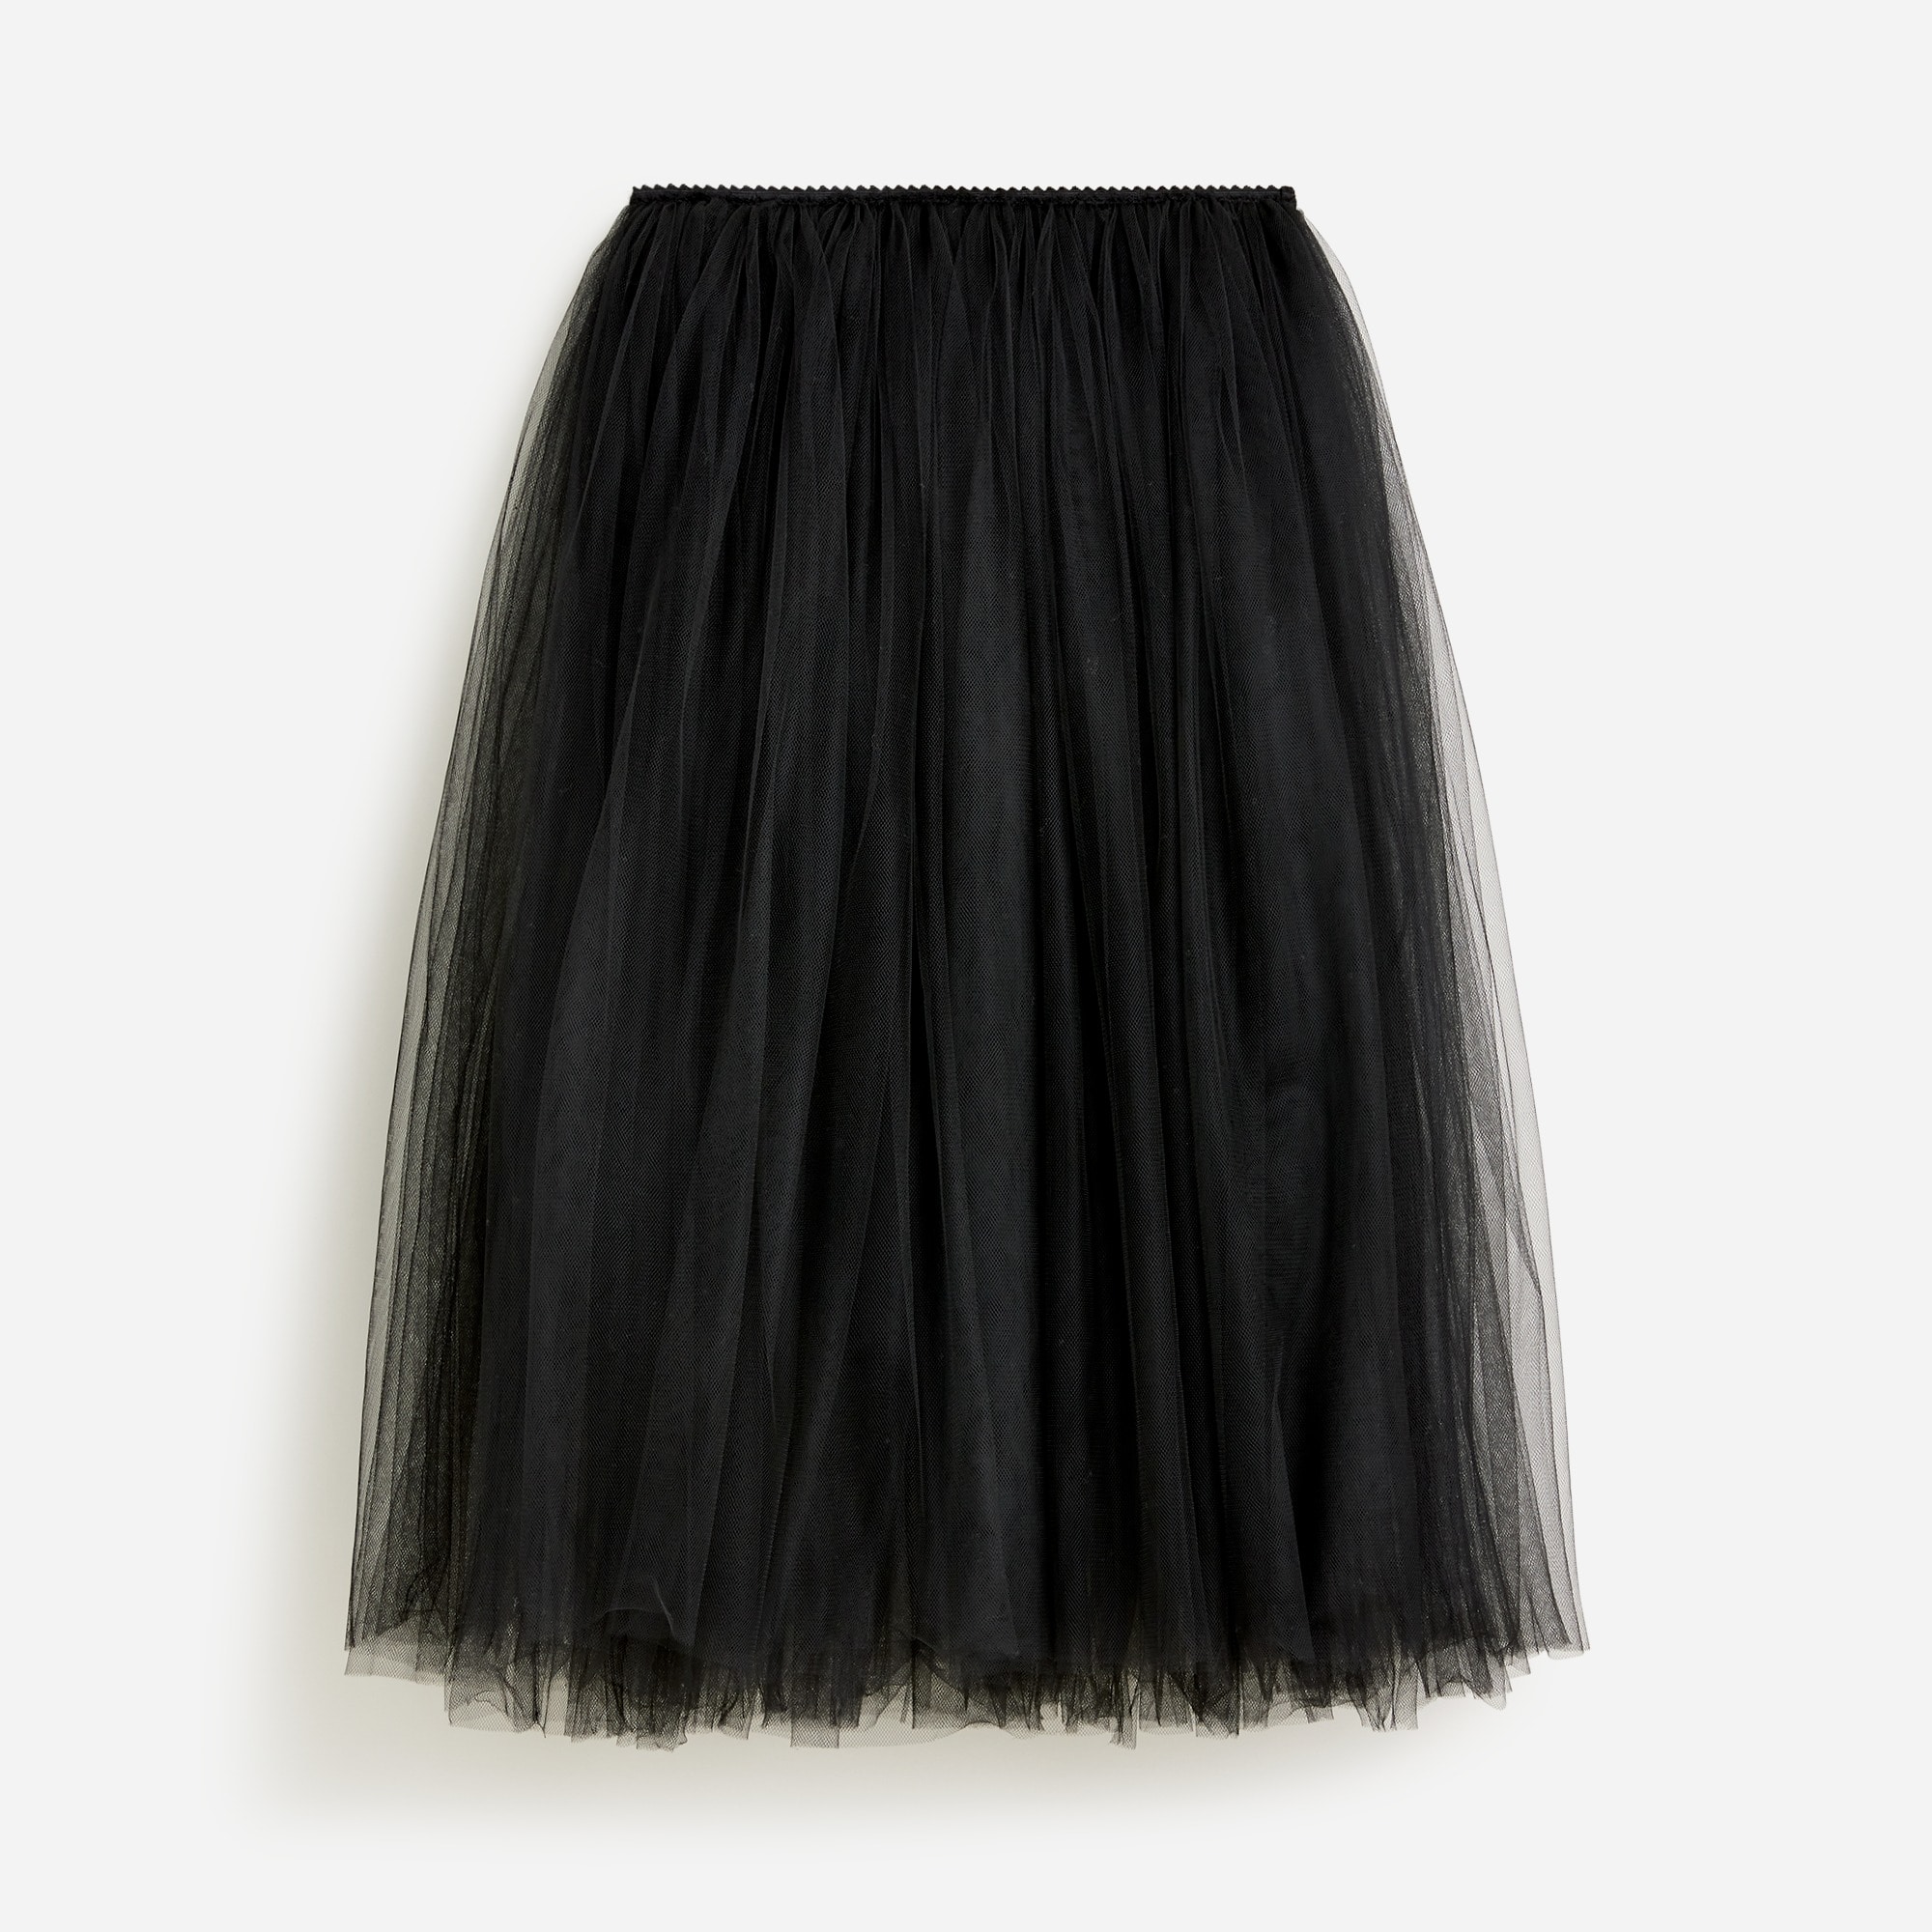  Repetto rehearsal tulle skirt